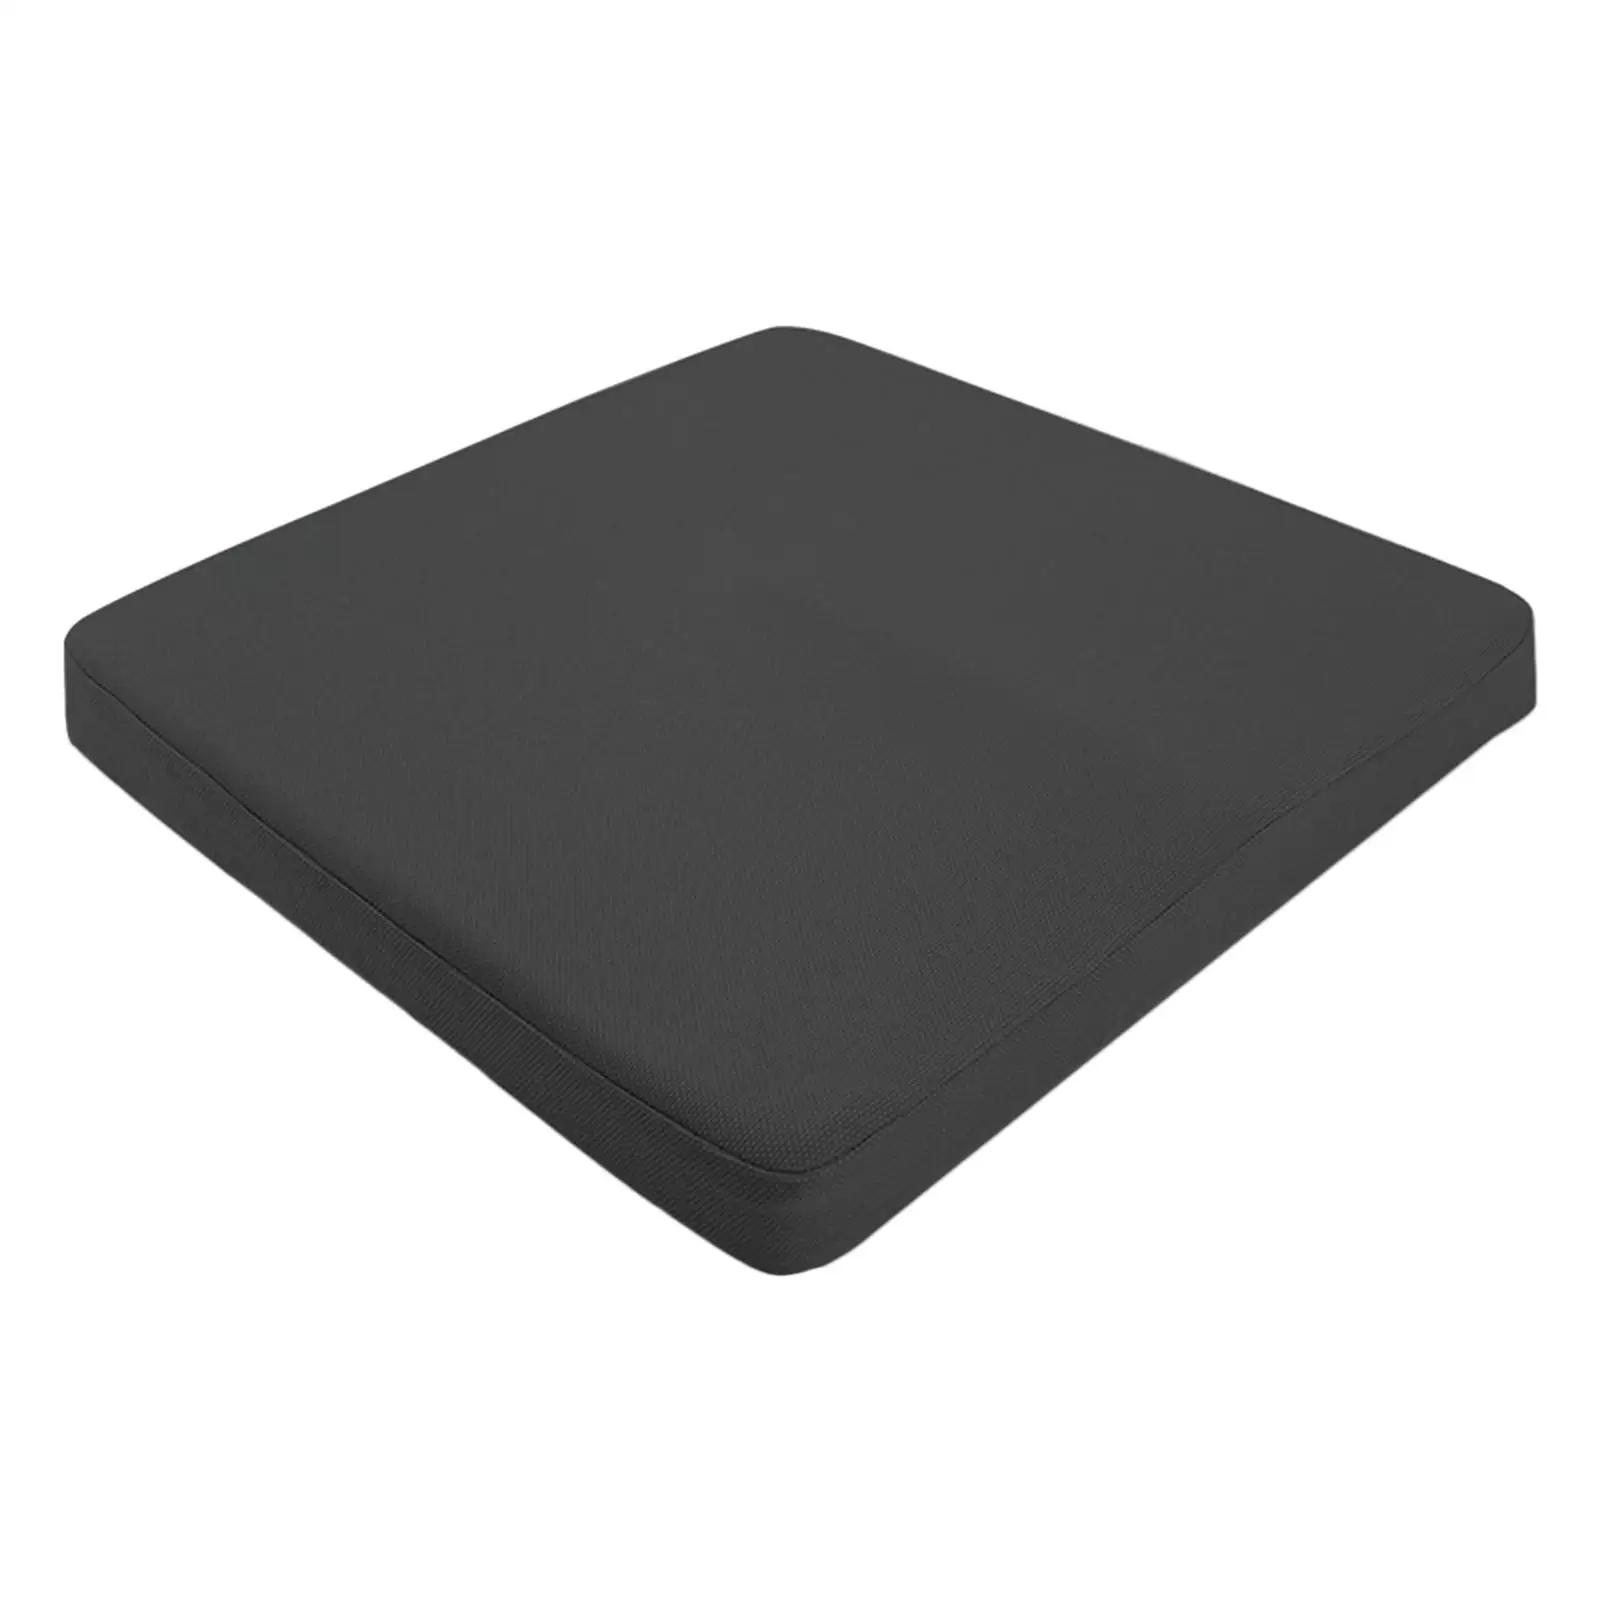 Sitting Pad Support Comfortable Portable Thicken Memory Foam Seat Cushion Soft Seat Cushion for Office Home Dining Chair